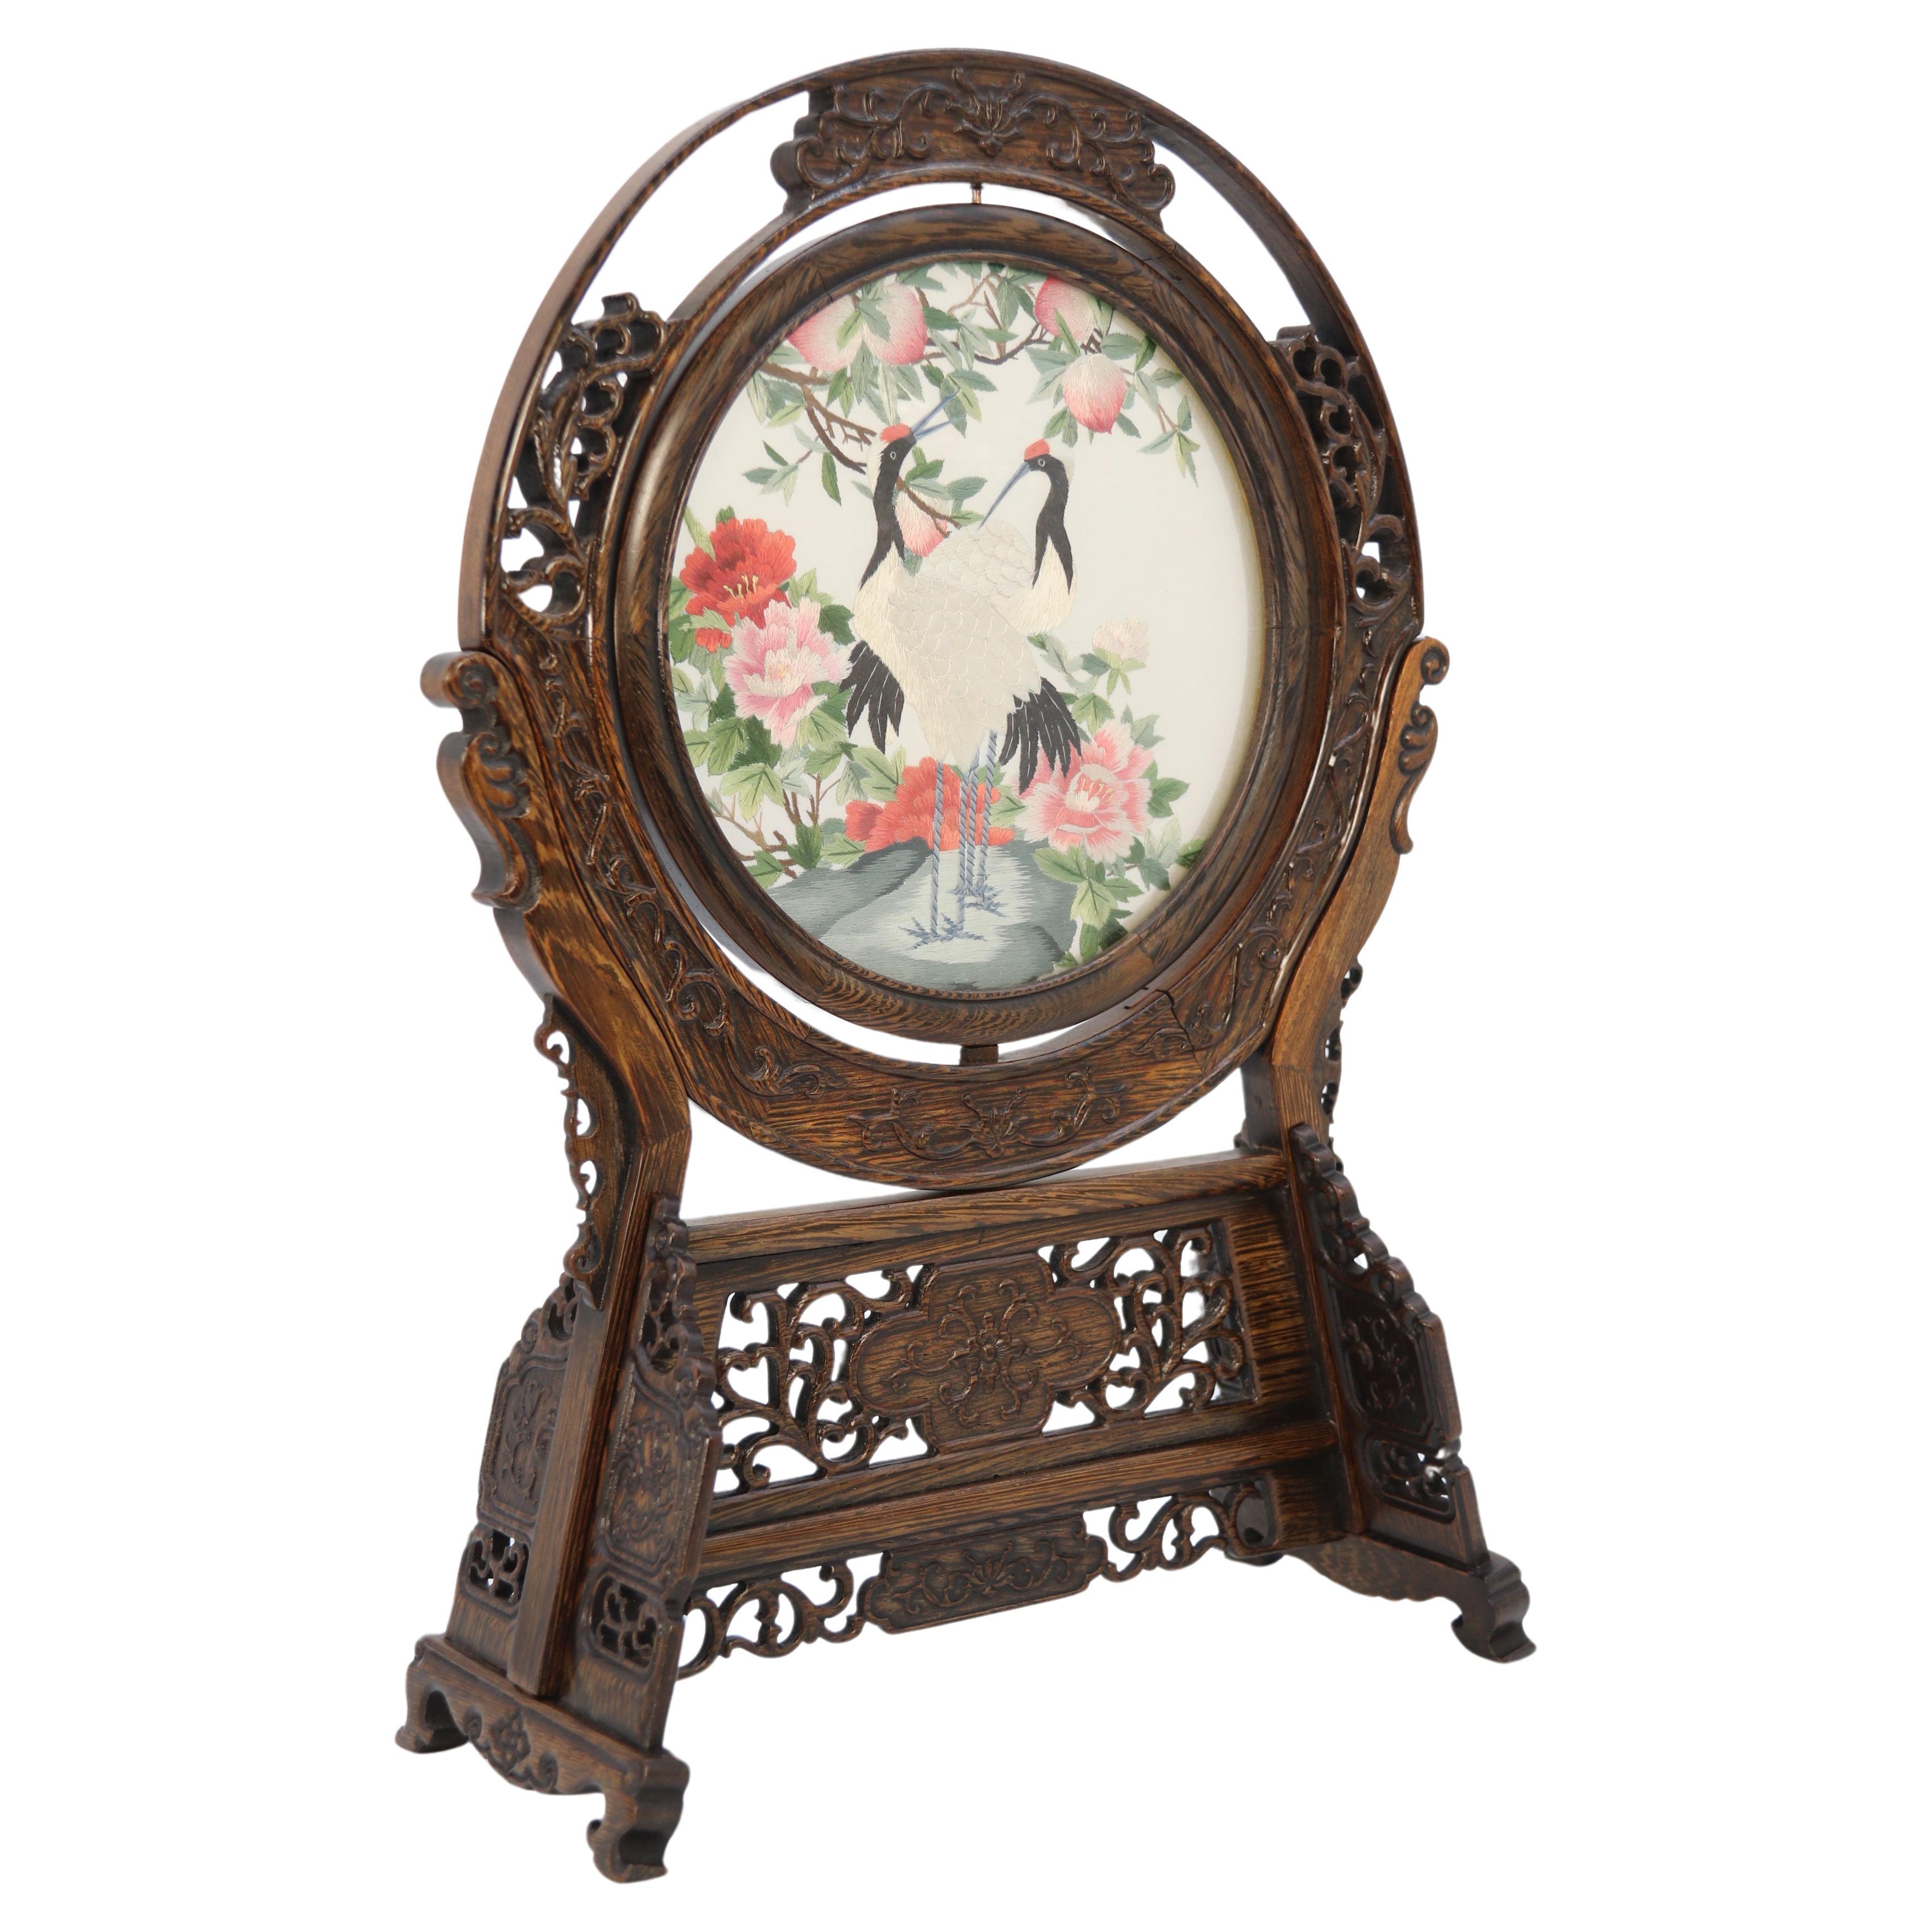 Chinese reversible silk needlework in a fine carved hardwood stand circa 1920